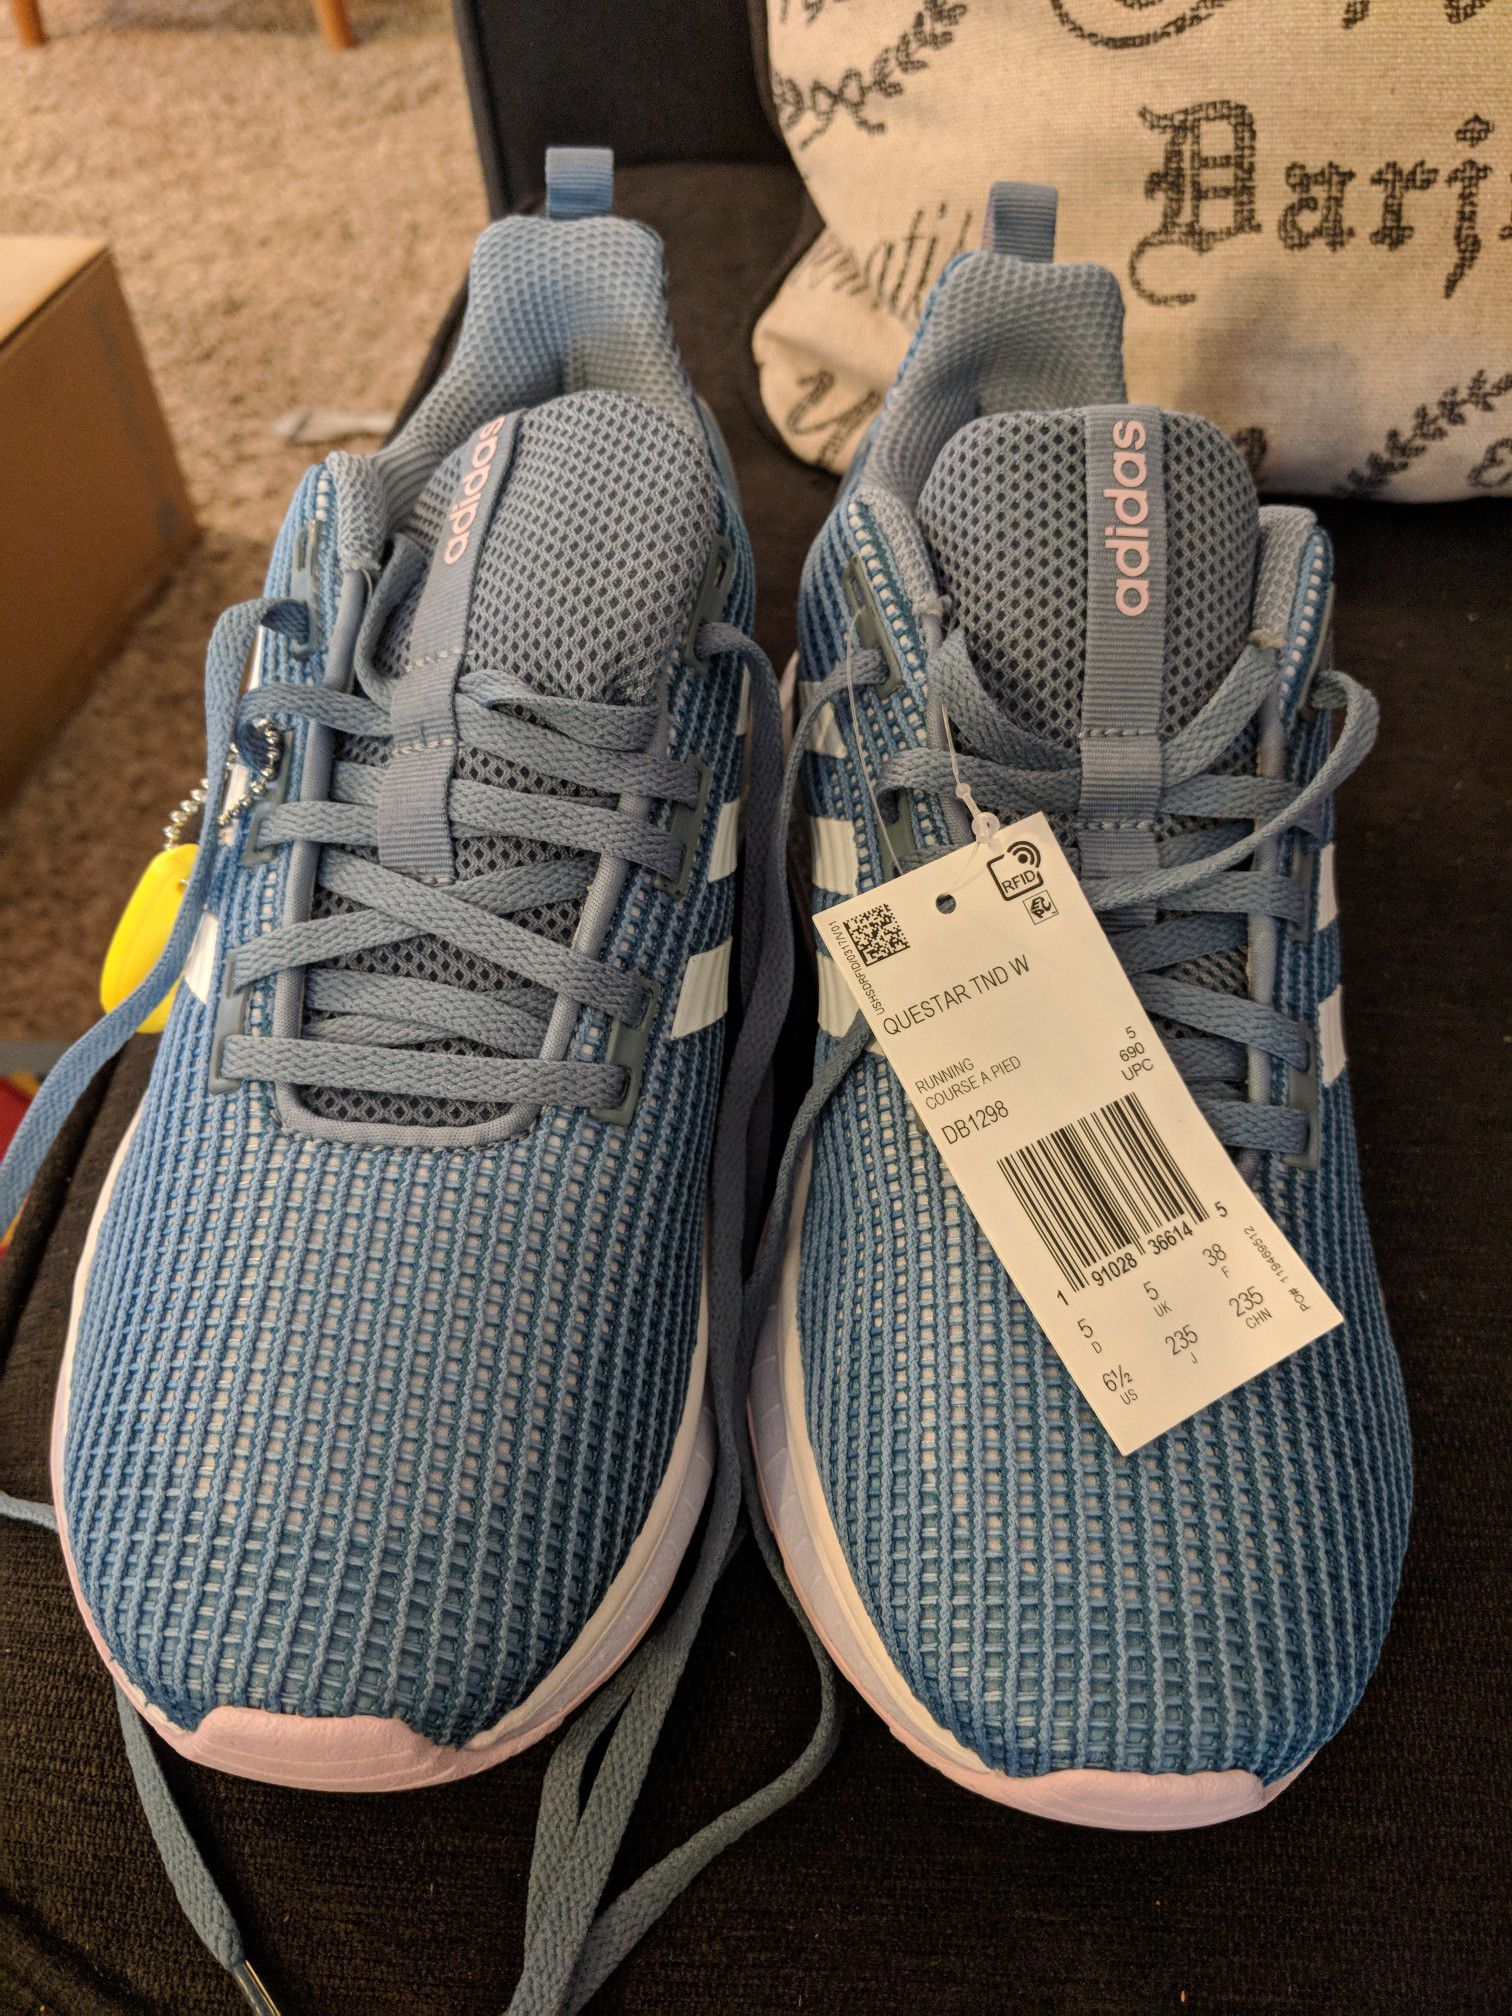 Adidas Questar Running Shoes Size 6.5- for Sale in Vancouver, WA - OfferUp